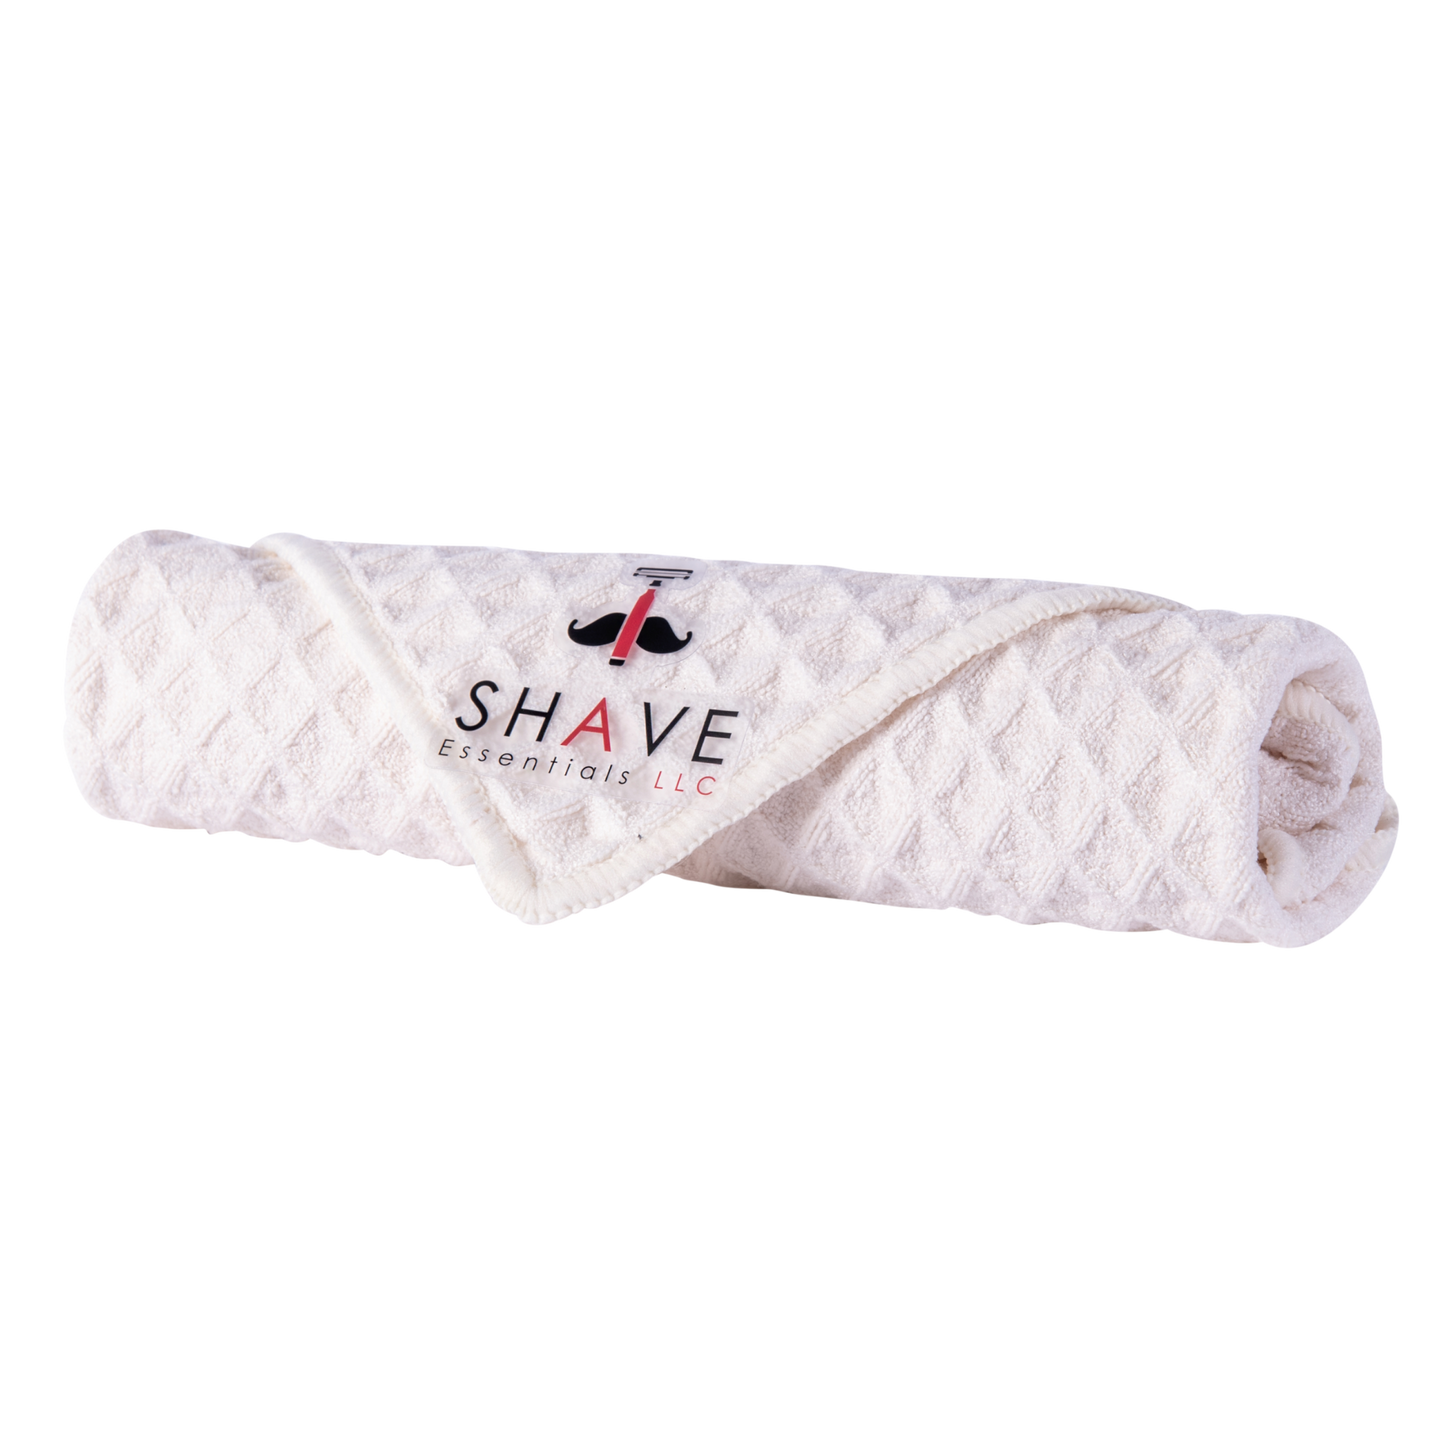 Shave Essentials Grooming Kit